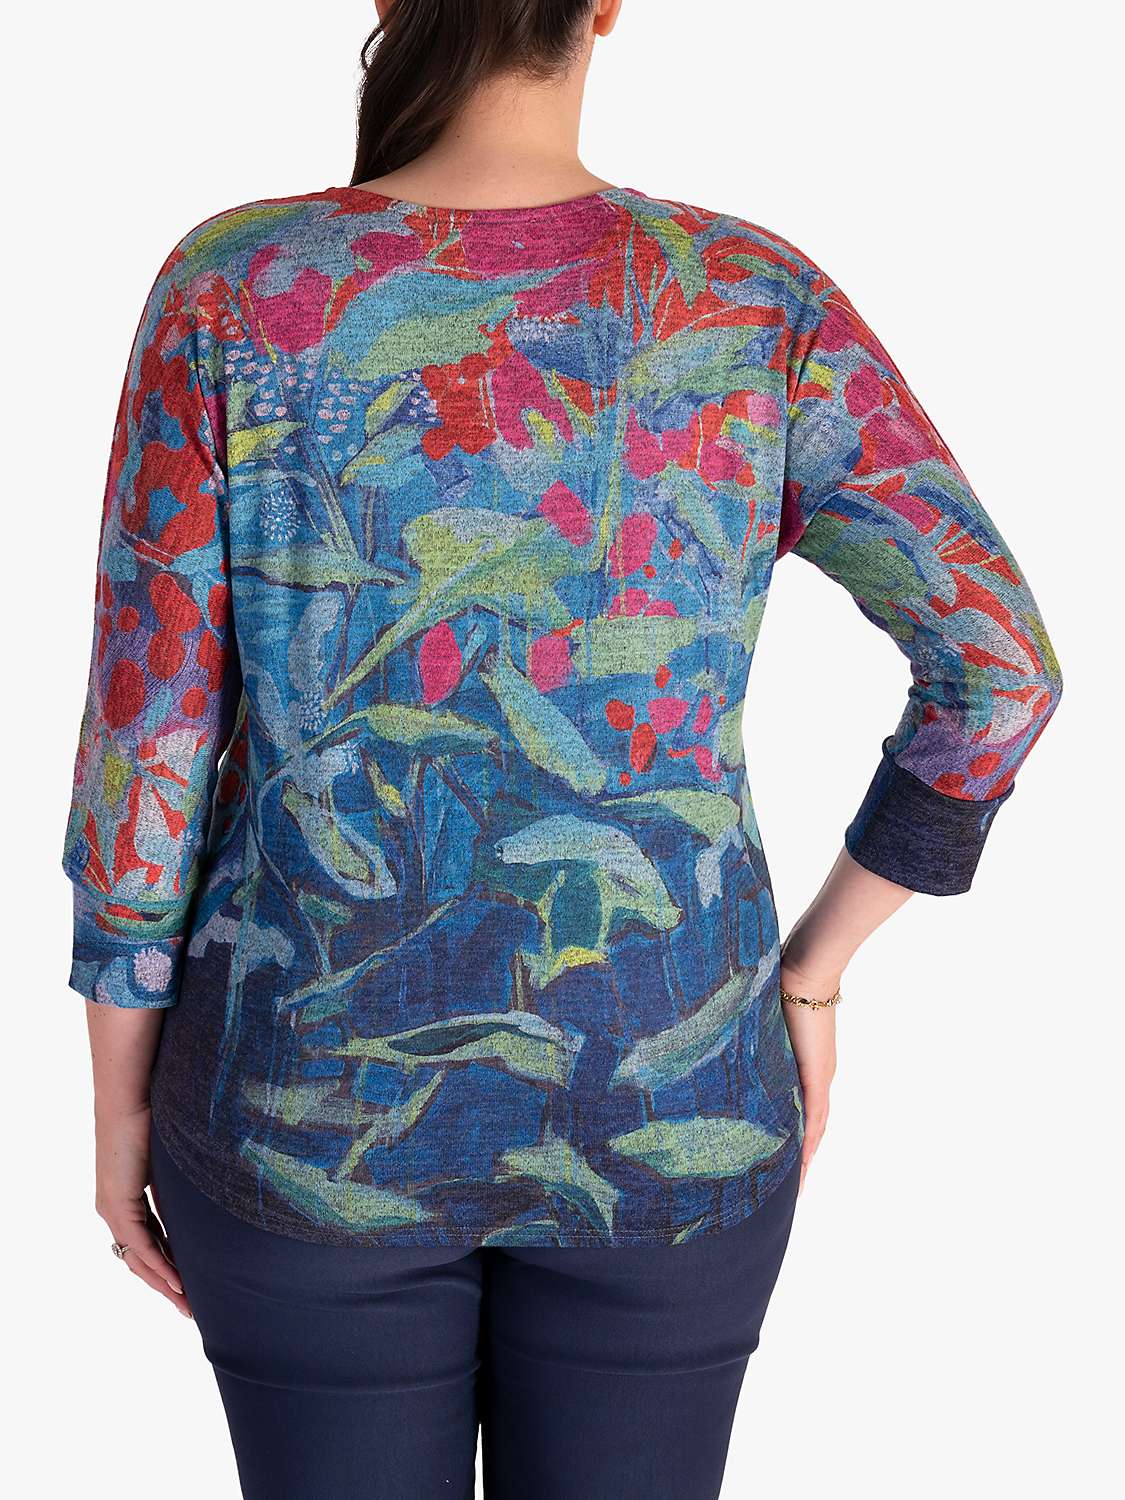 Buy chesca Floral Jersey Top, Aqua/Multi Online at johnlewis.com